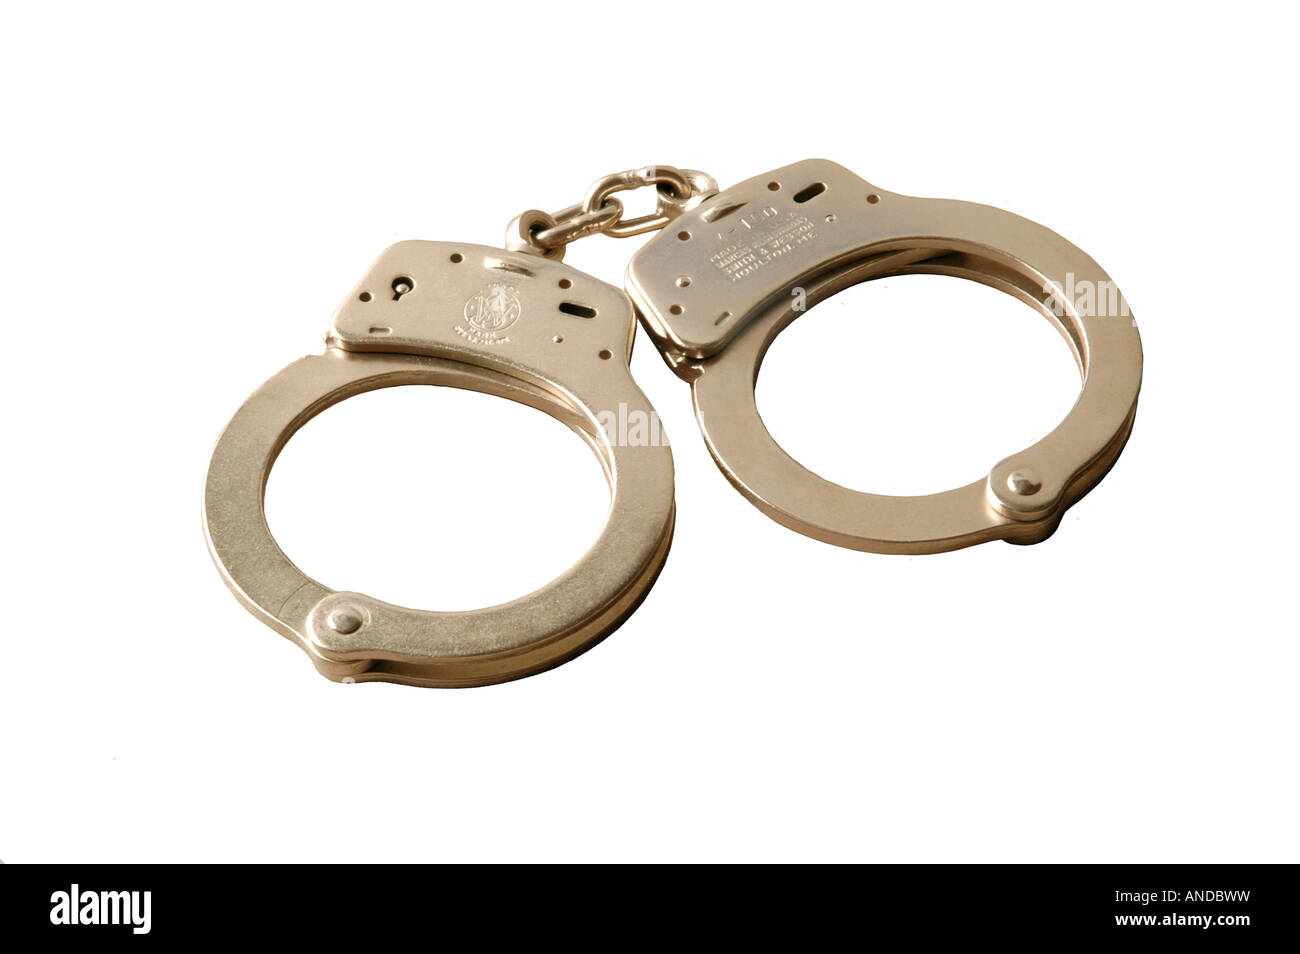 A pair of police handcuffs against white background Stock Photo